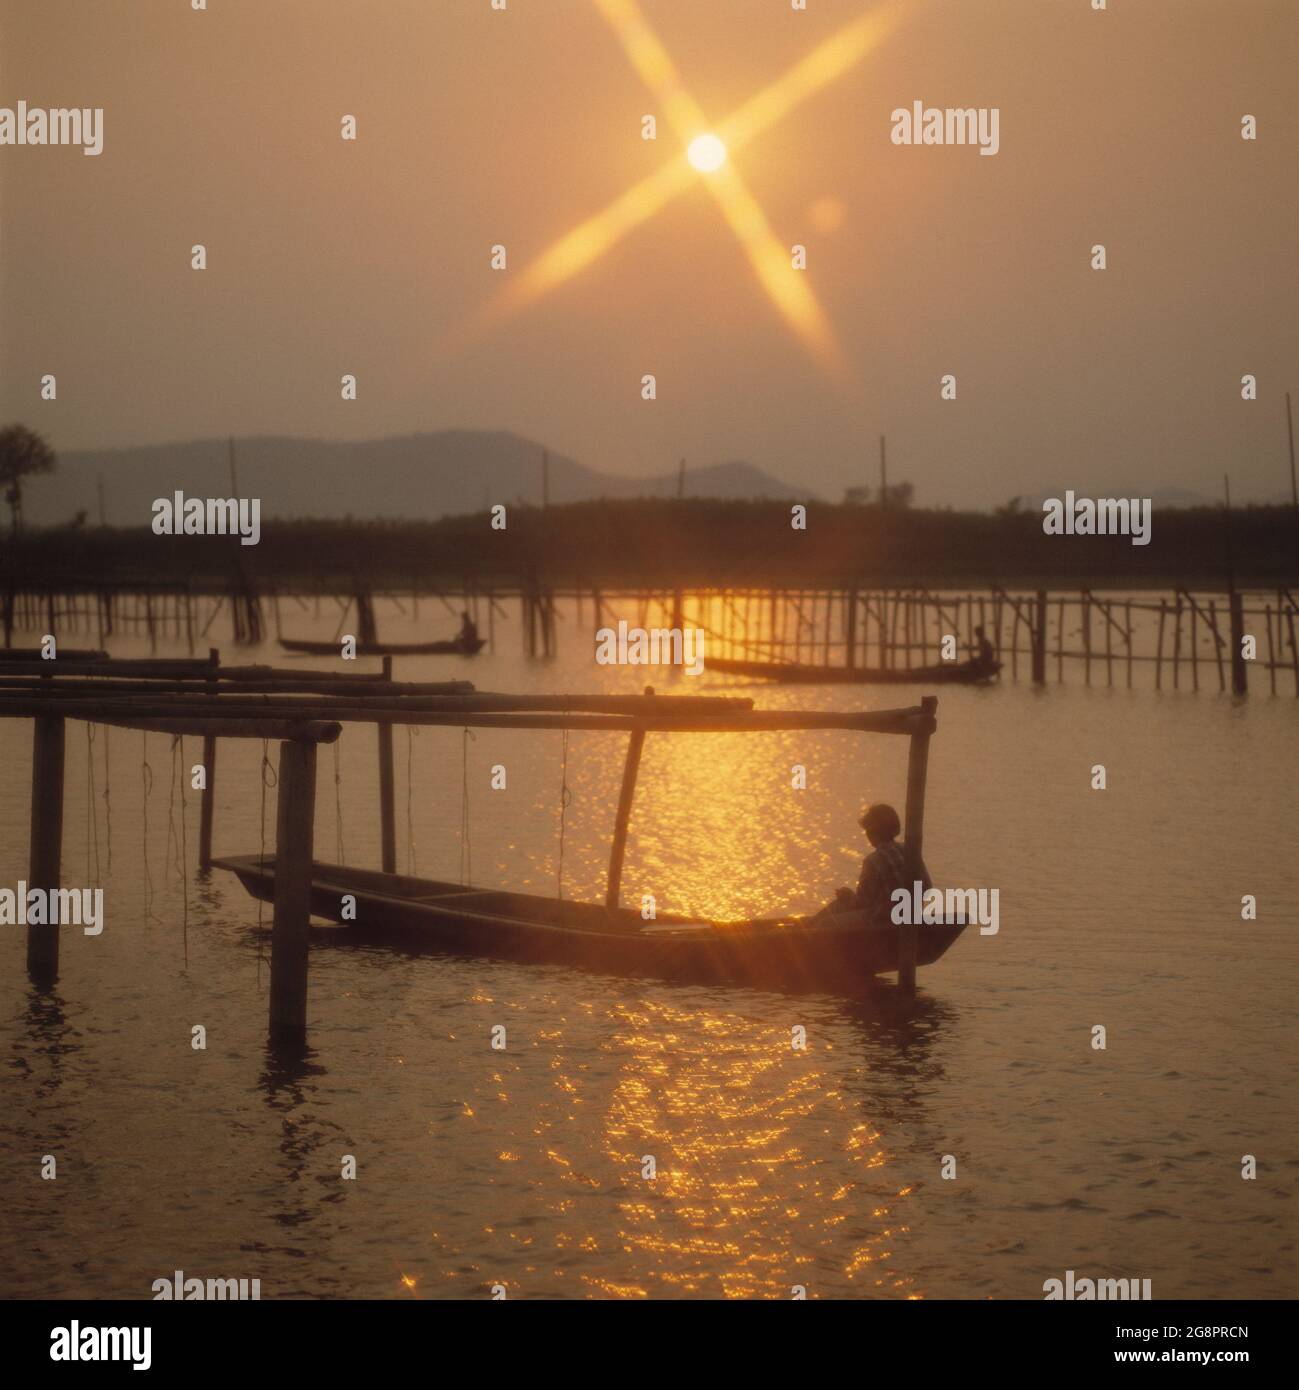 China. Zhejiang Province. Coast. Pearl fishery with men in canoes at sunset. Stock Photo